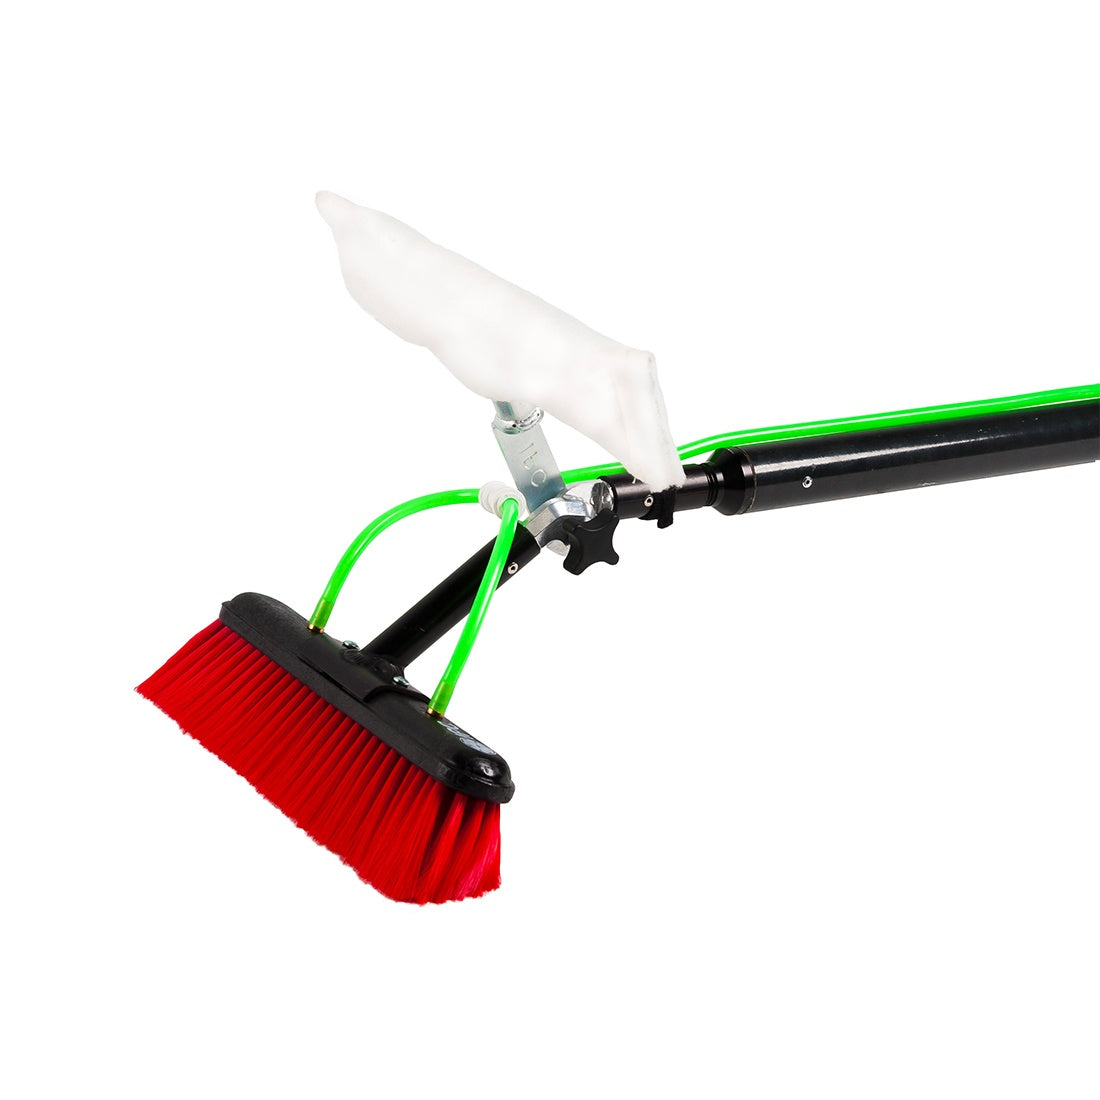 IPC Eagle Back Scrub Brush Attachment with HD Scrub Sleeve - Attached to Water Fed Pole